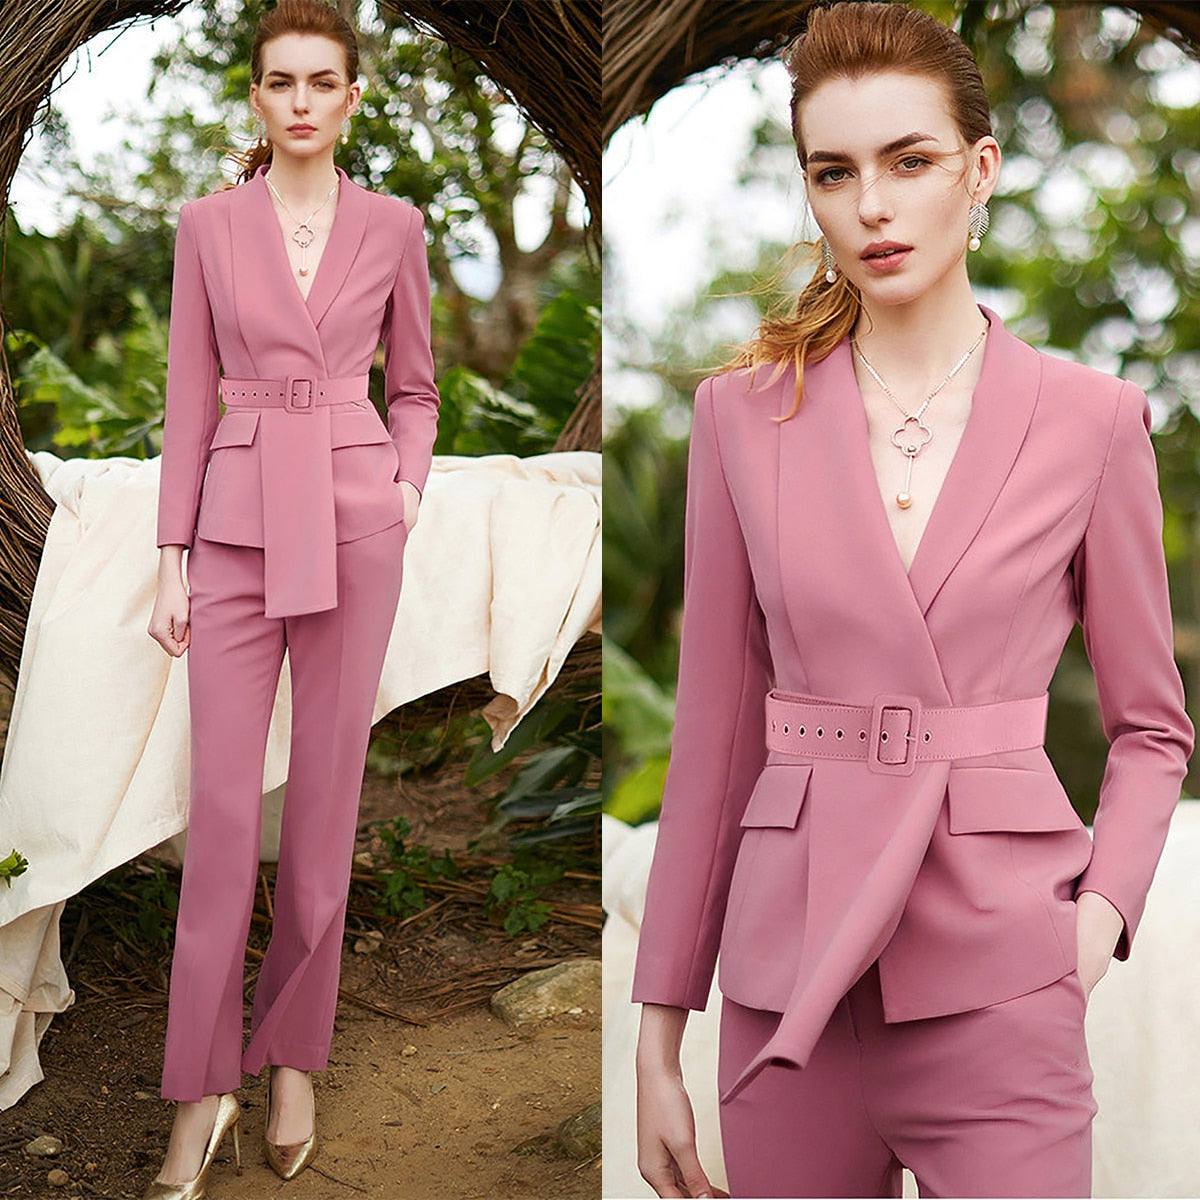 Celebrity Tailored Women Pants Suits Slim Fit Prom Party Wear Blazer For Wedding Wide Leg 2 Pieces